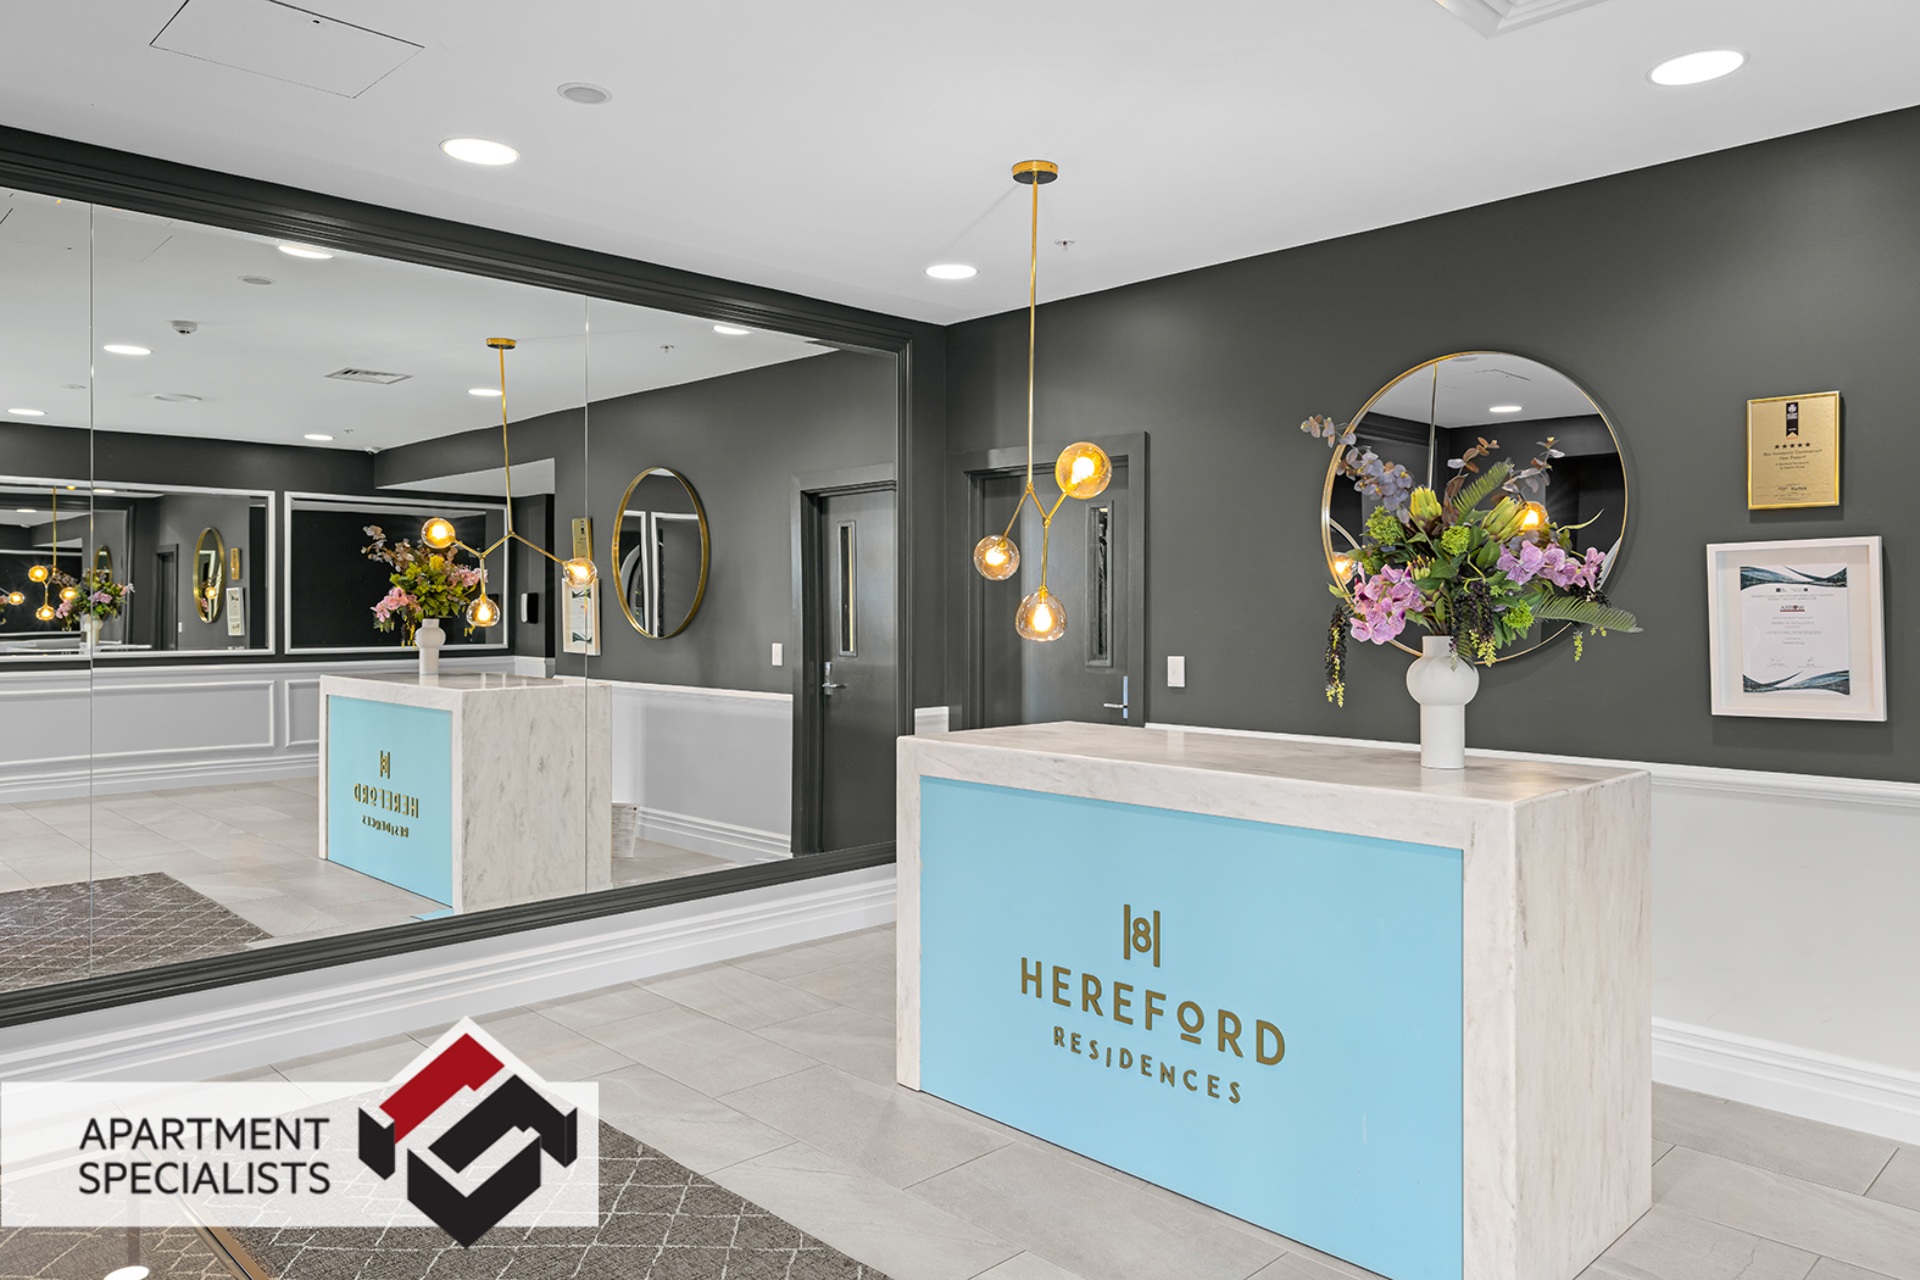 20 | 8 Hereford Street, Freemans Bay | Apartment Specialists